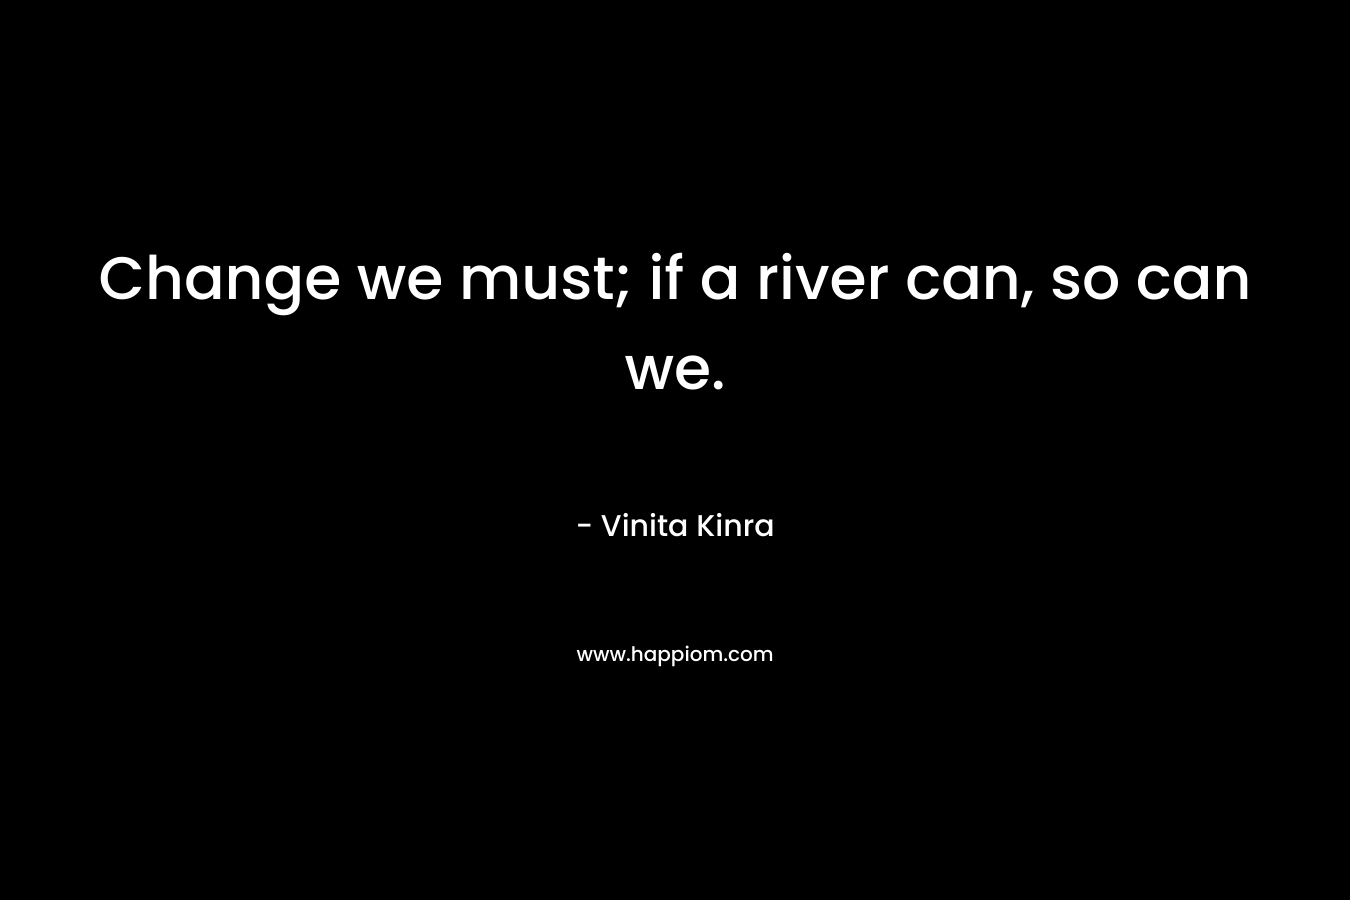 Change we must; if a river can, so can we.